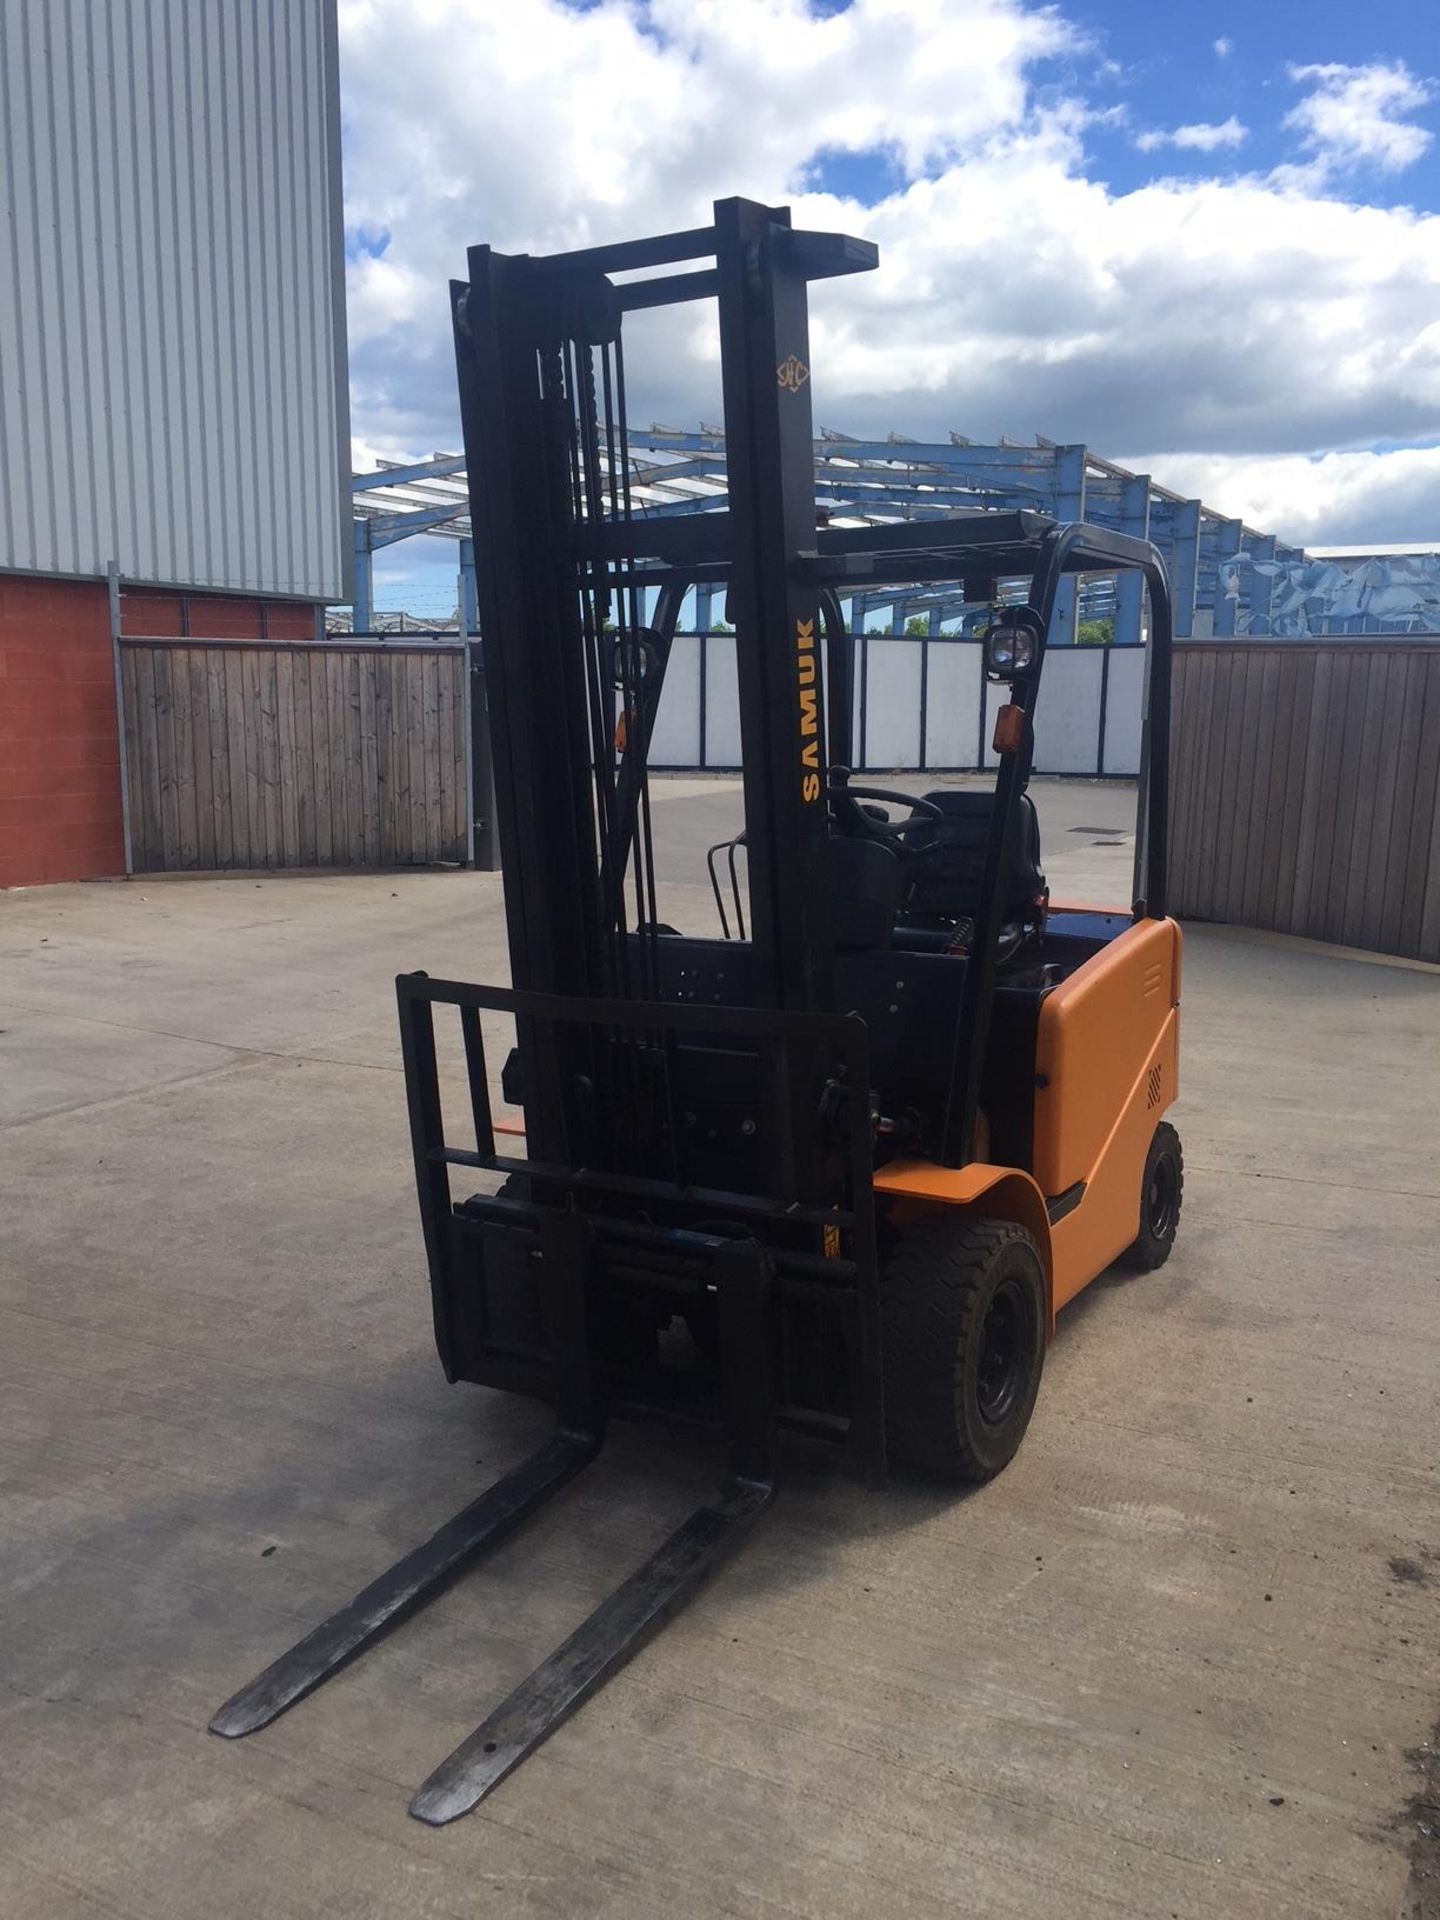 Sam-uk electric counterbalance fork lift truck - Fully refurbished and painted.